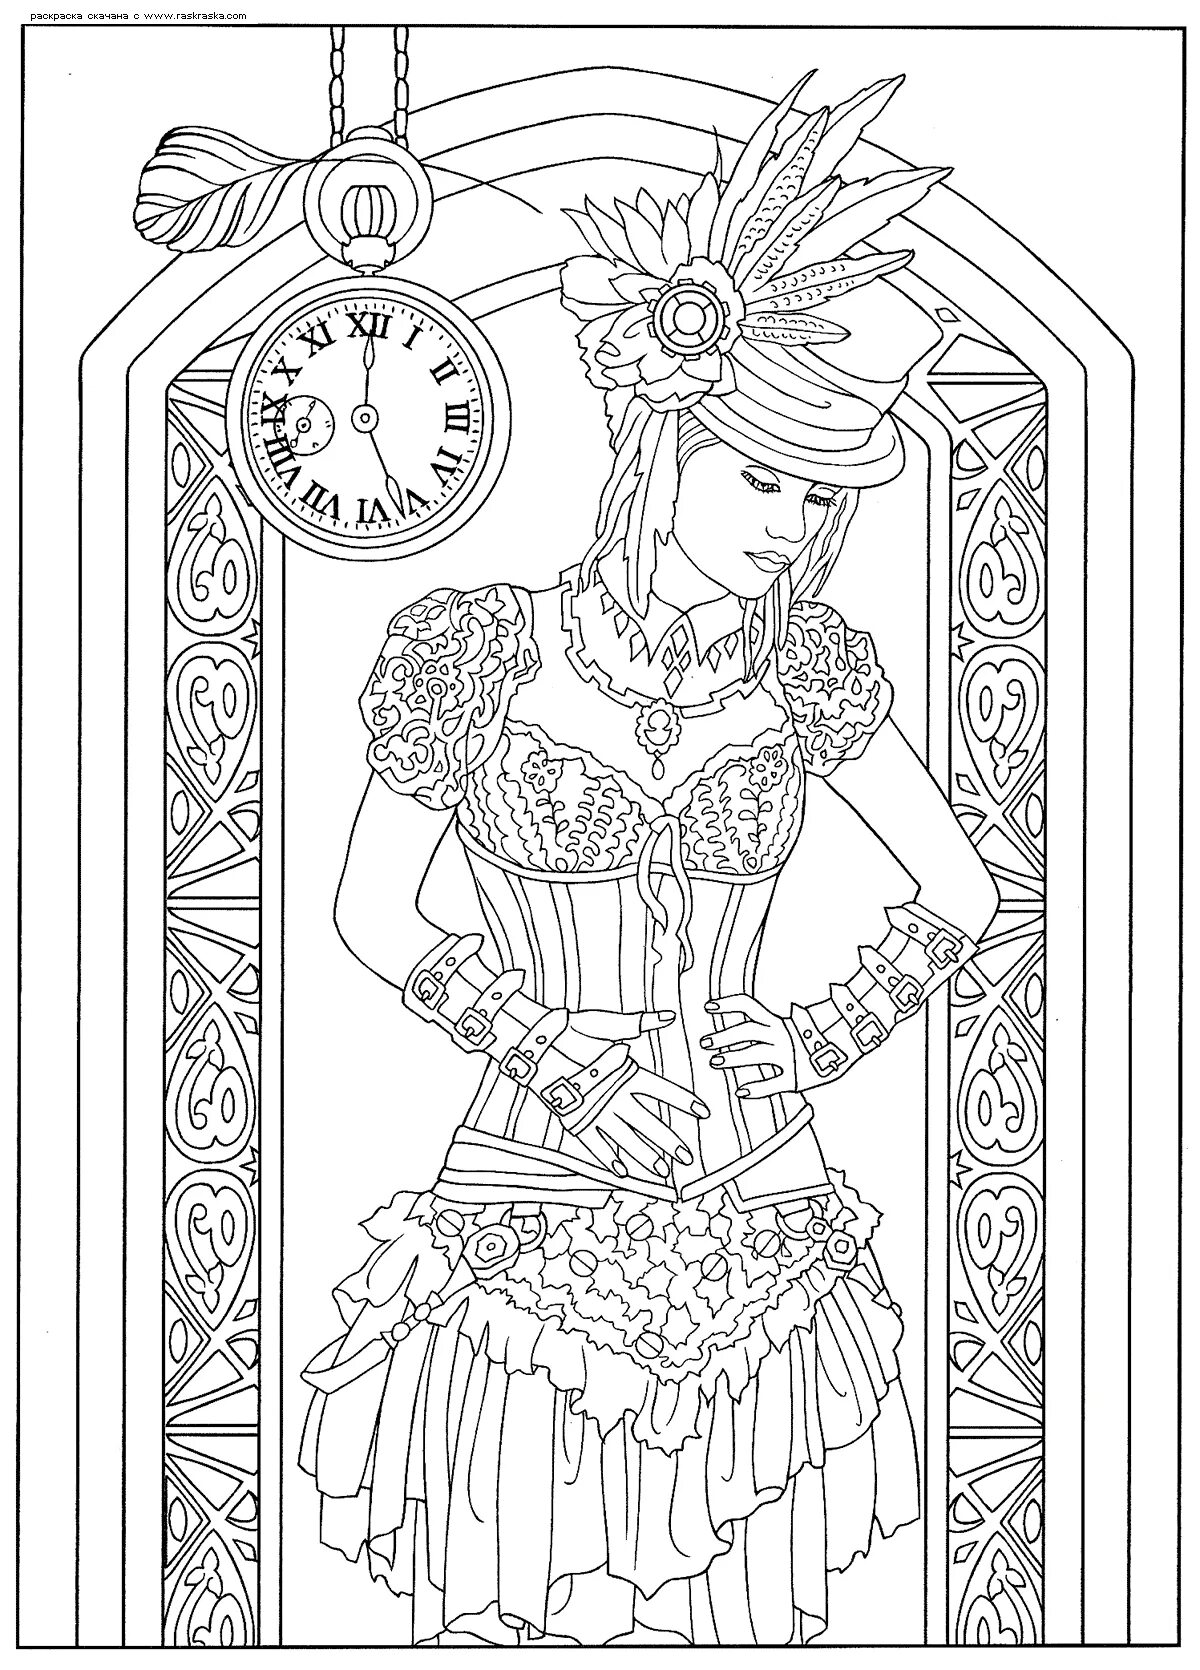 Witty steampunk coloring book